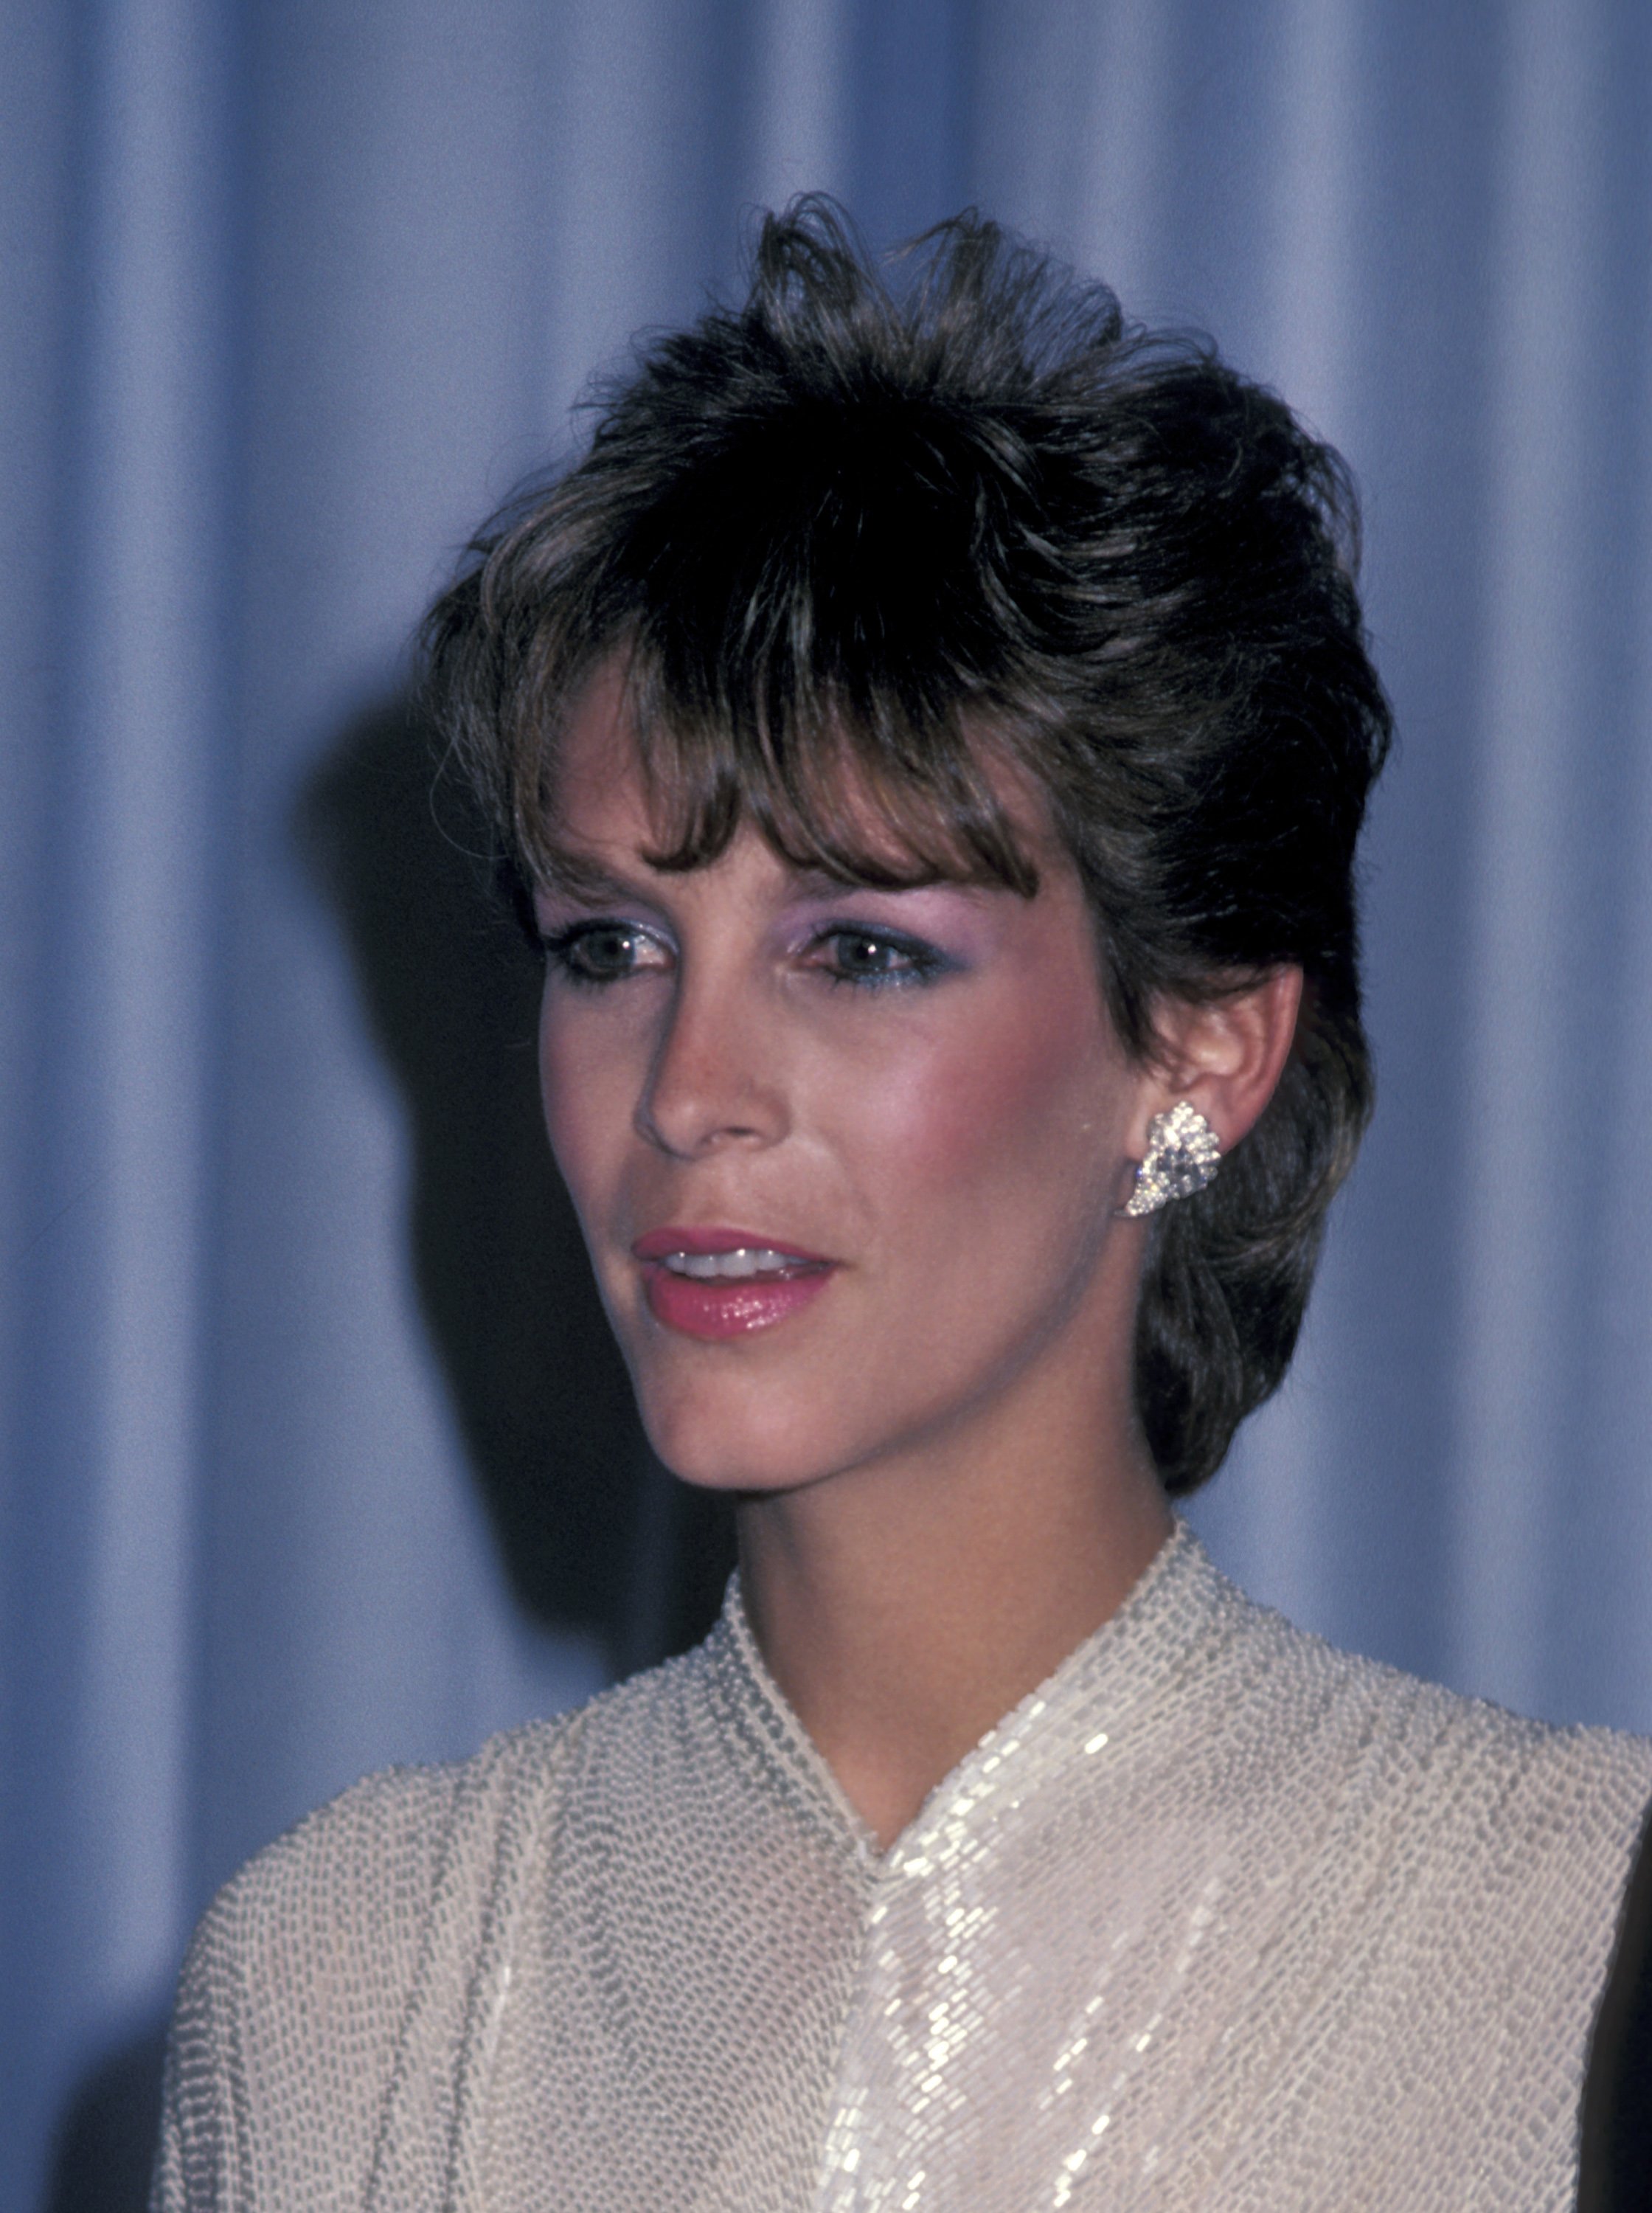 Jamie Lee Curtis during the 55th Annual Academy Awards in Los Angeles, California, on April 11, 1983. | Source: Getty Images